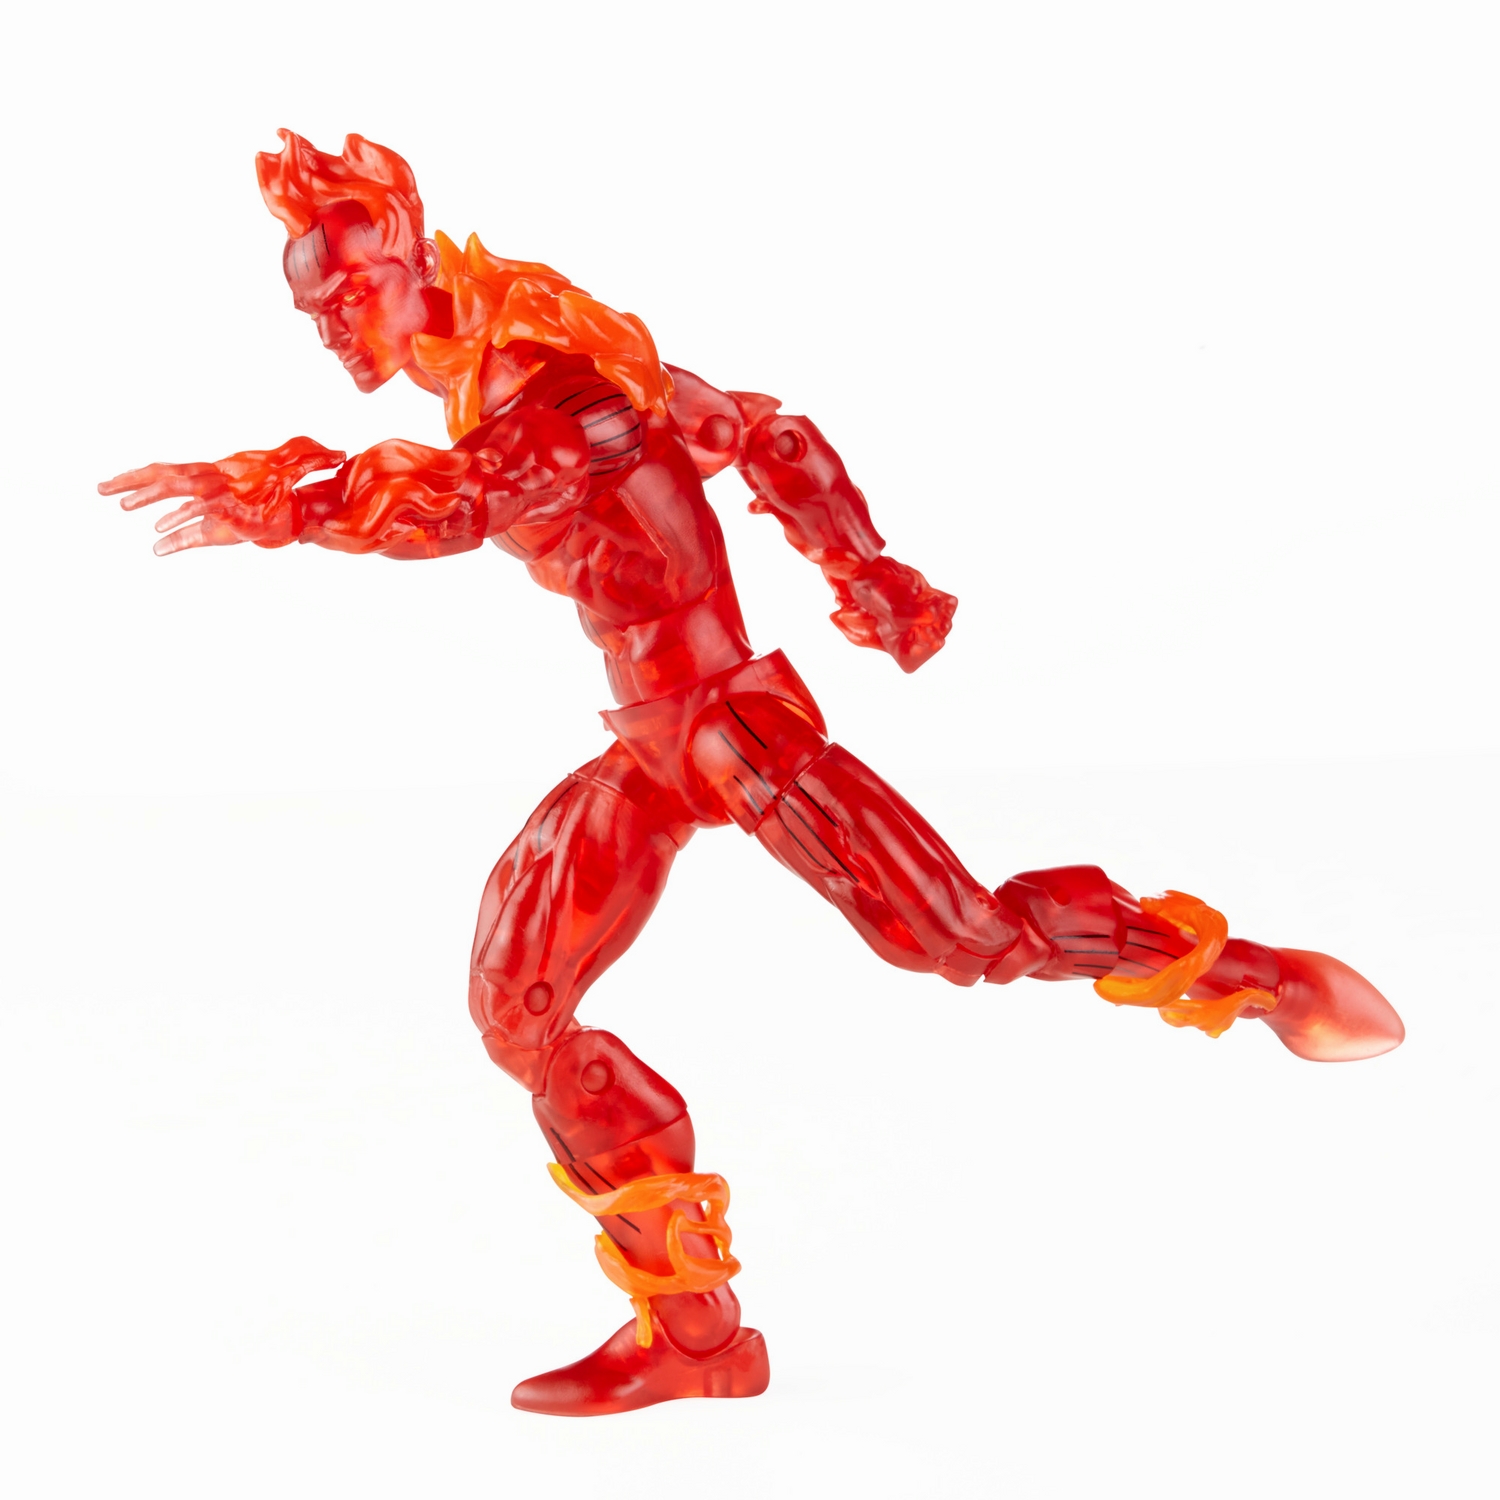 MARVEL LEGENDS SERIES 6-INCH RETRO FANTASTIC FOUR THE HUMAN TORCH Figure_oop 4.jpg